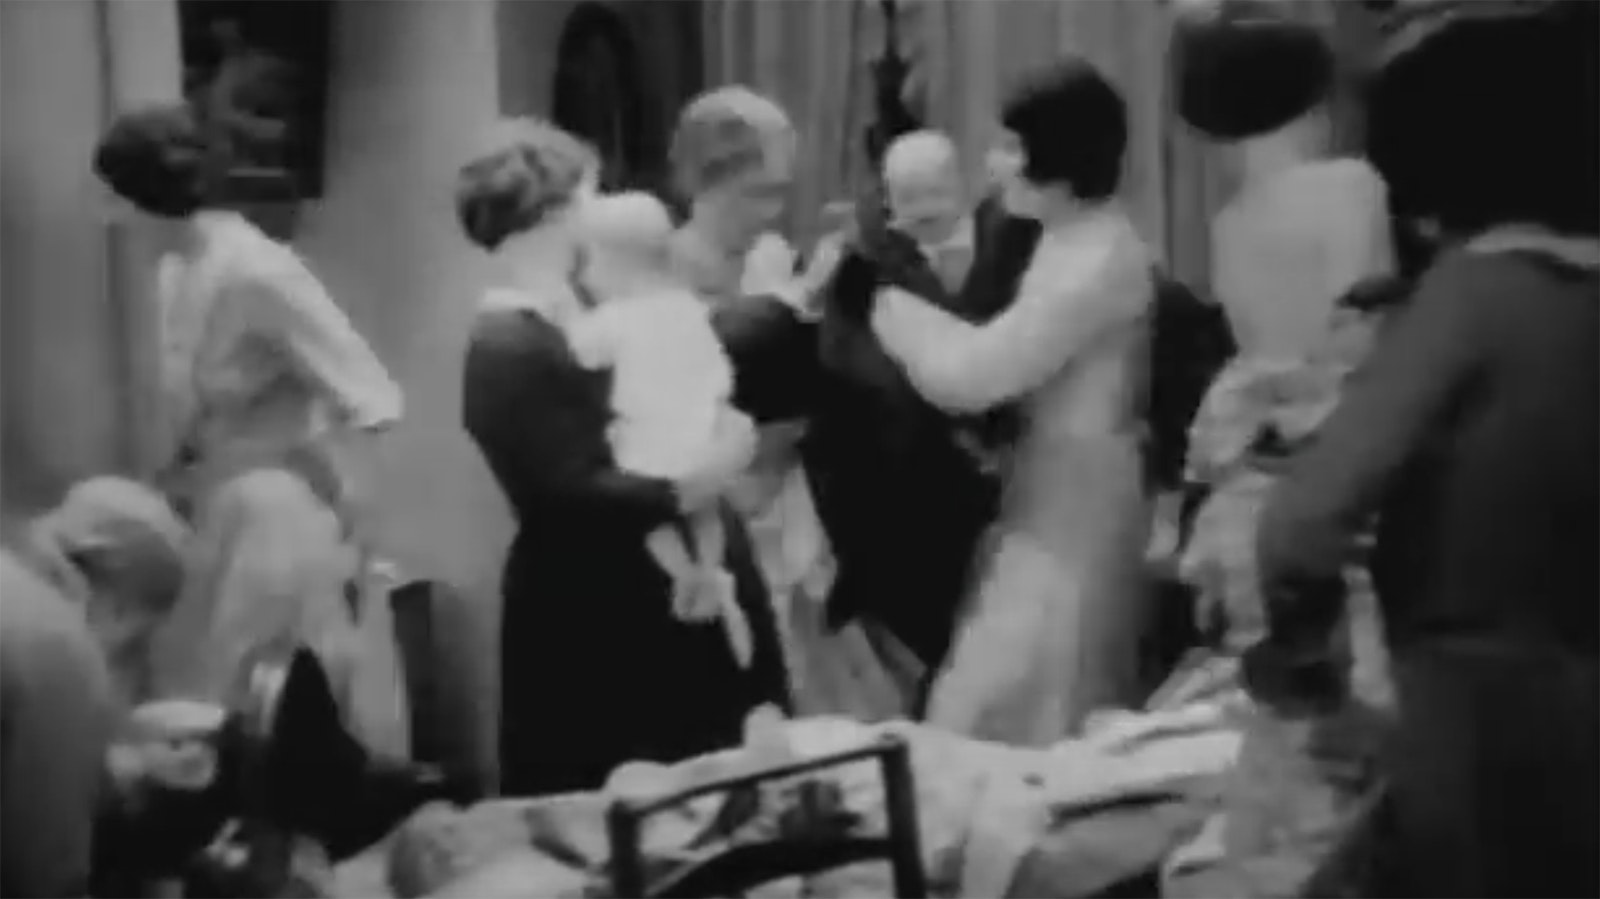 This screenshot shows the confusion caused by a baby-switch in the 1929 movie "The Virginian" starring Gary Cooper.